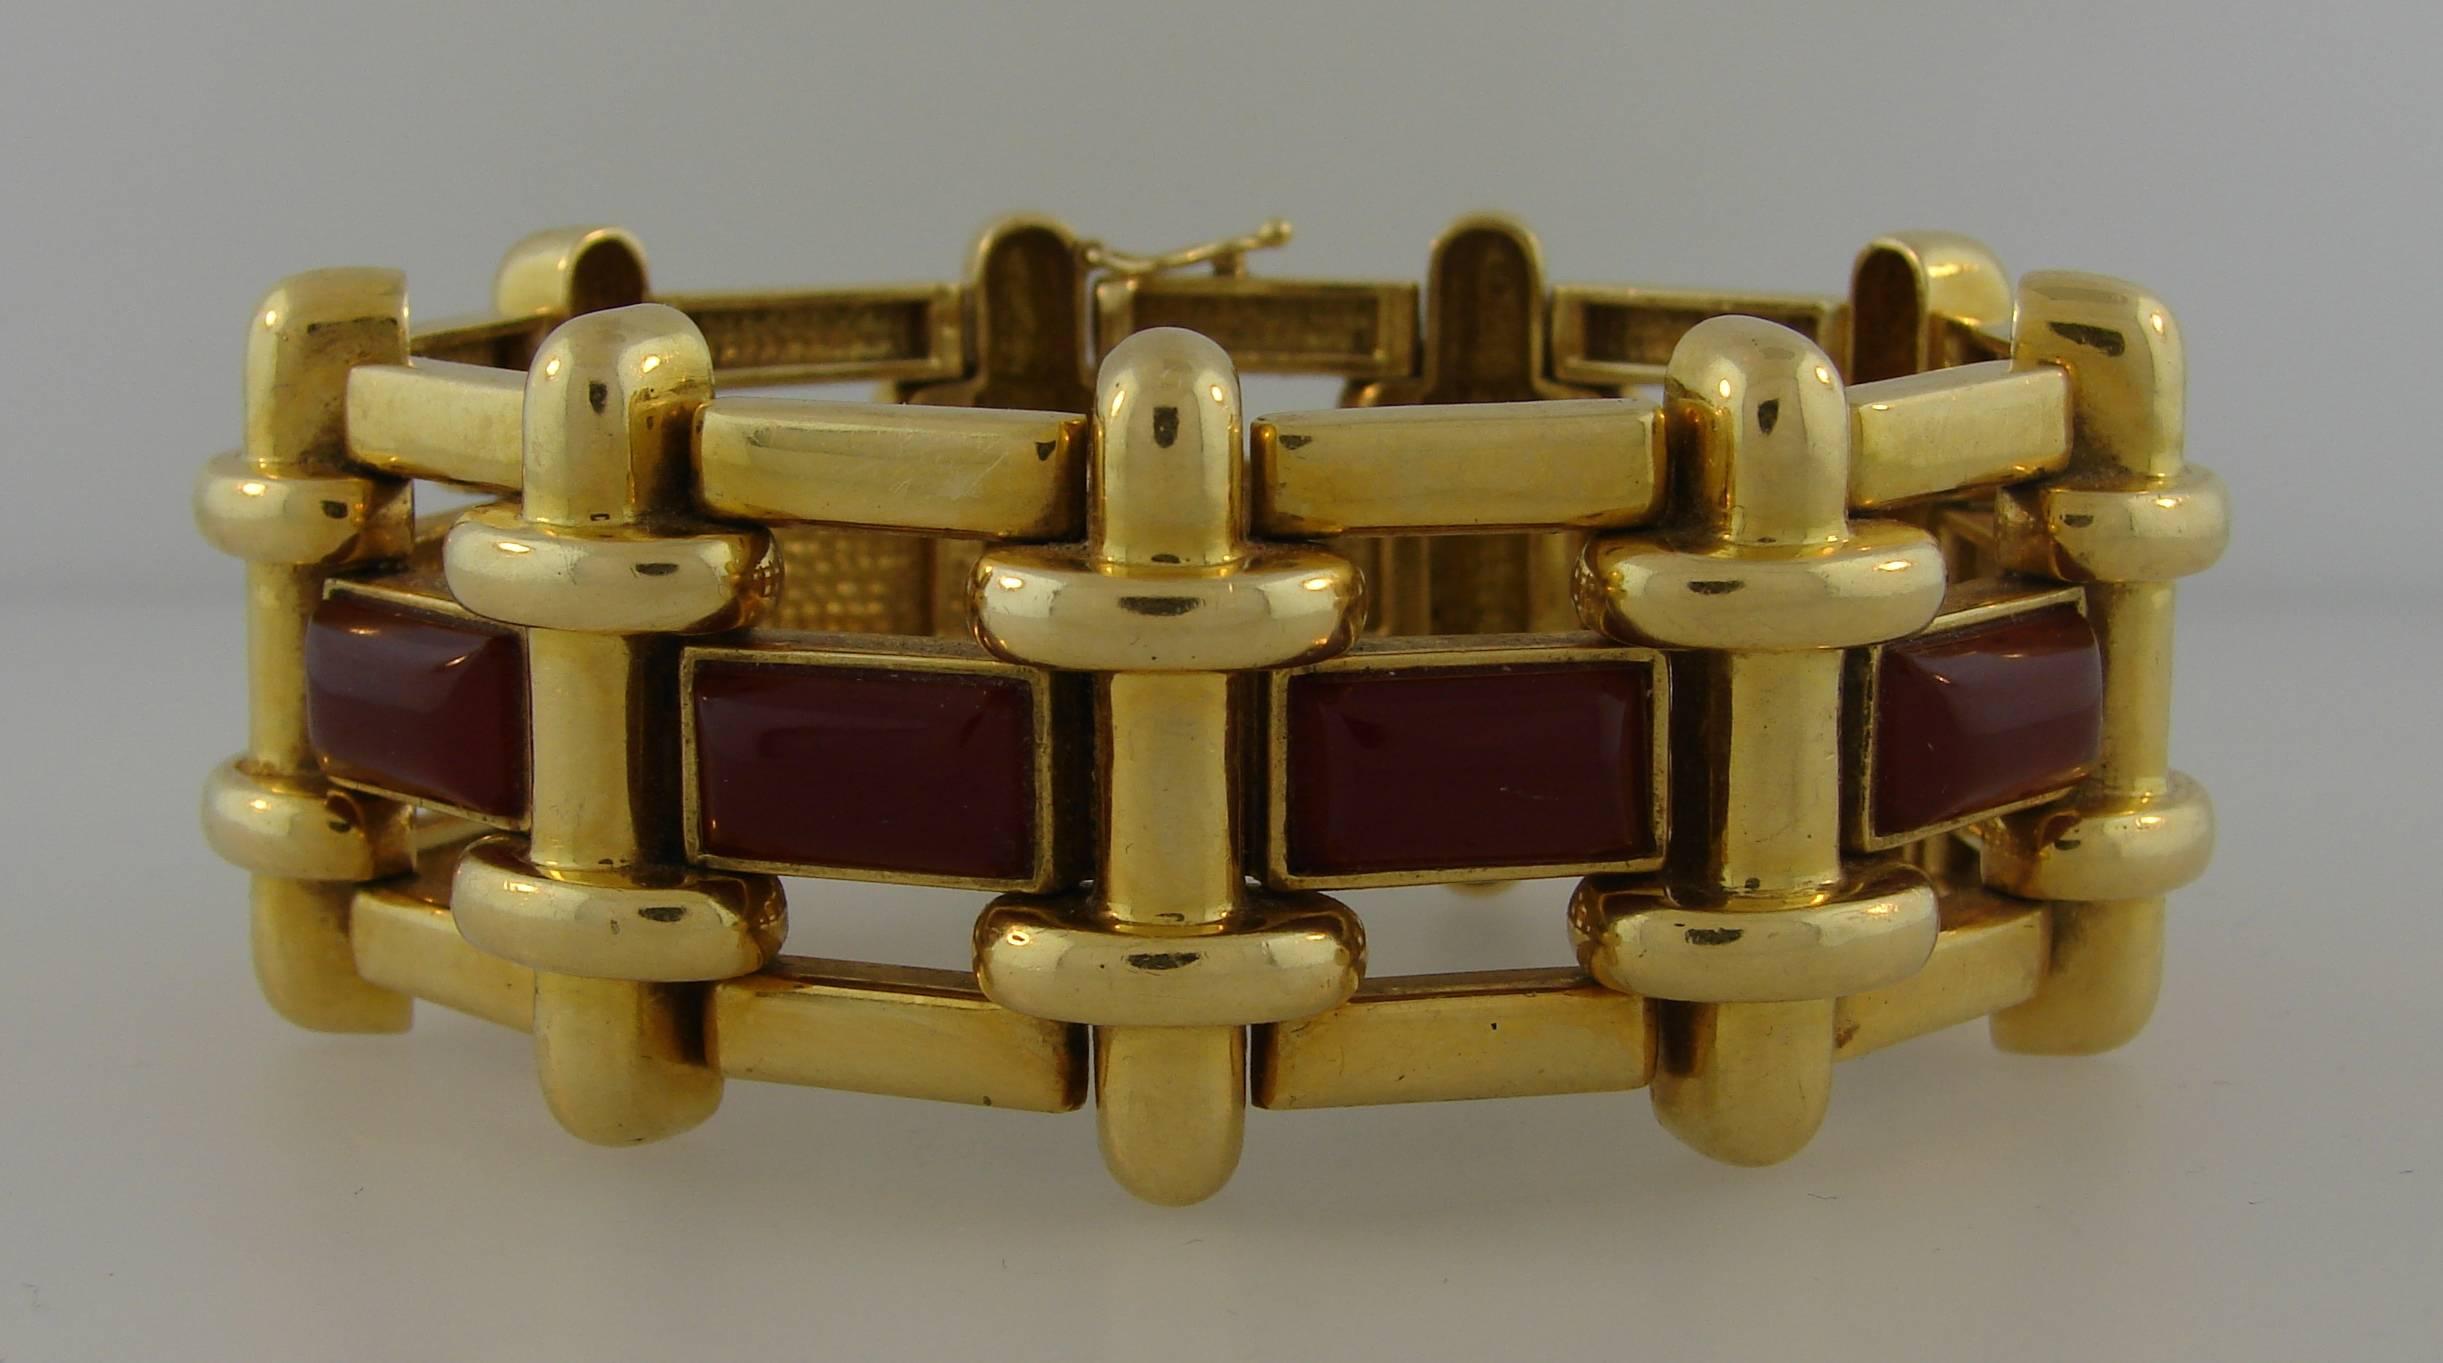 Bold architectural bracelet created by Aldo Cipullo for Cartier in the 1970s. Chic, wearable and collectable bracelet is a great addition to your jewelry collection. 
Made of 18 karat yellow gold and carnelian. 
The bracelet is 7 inches long and 1